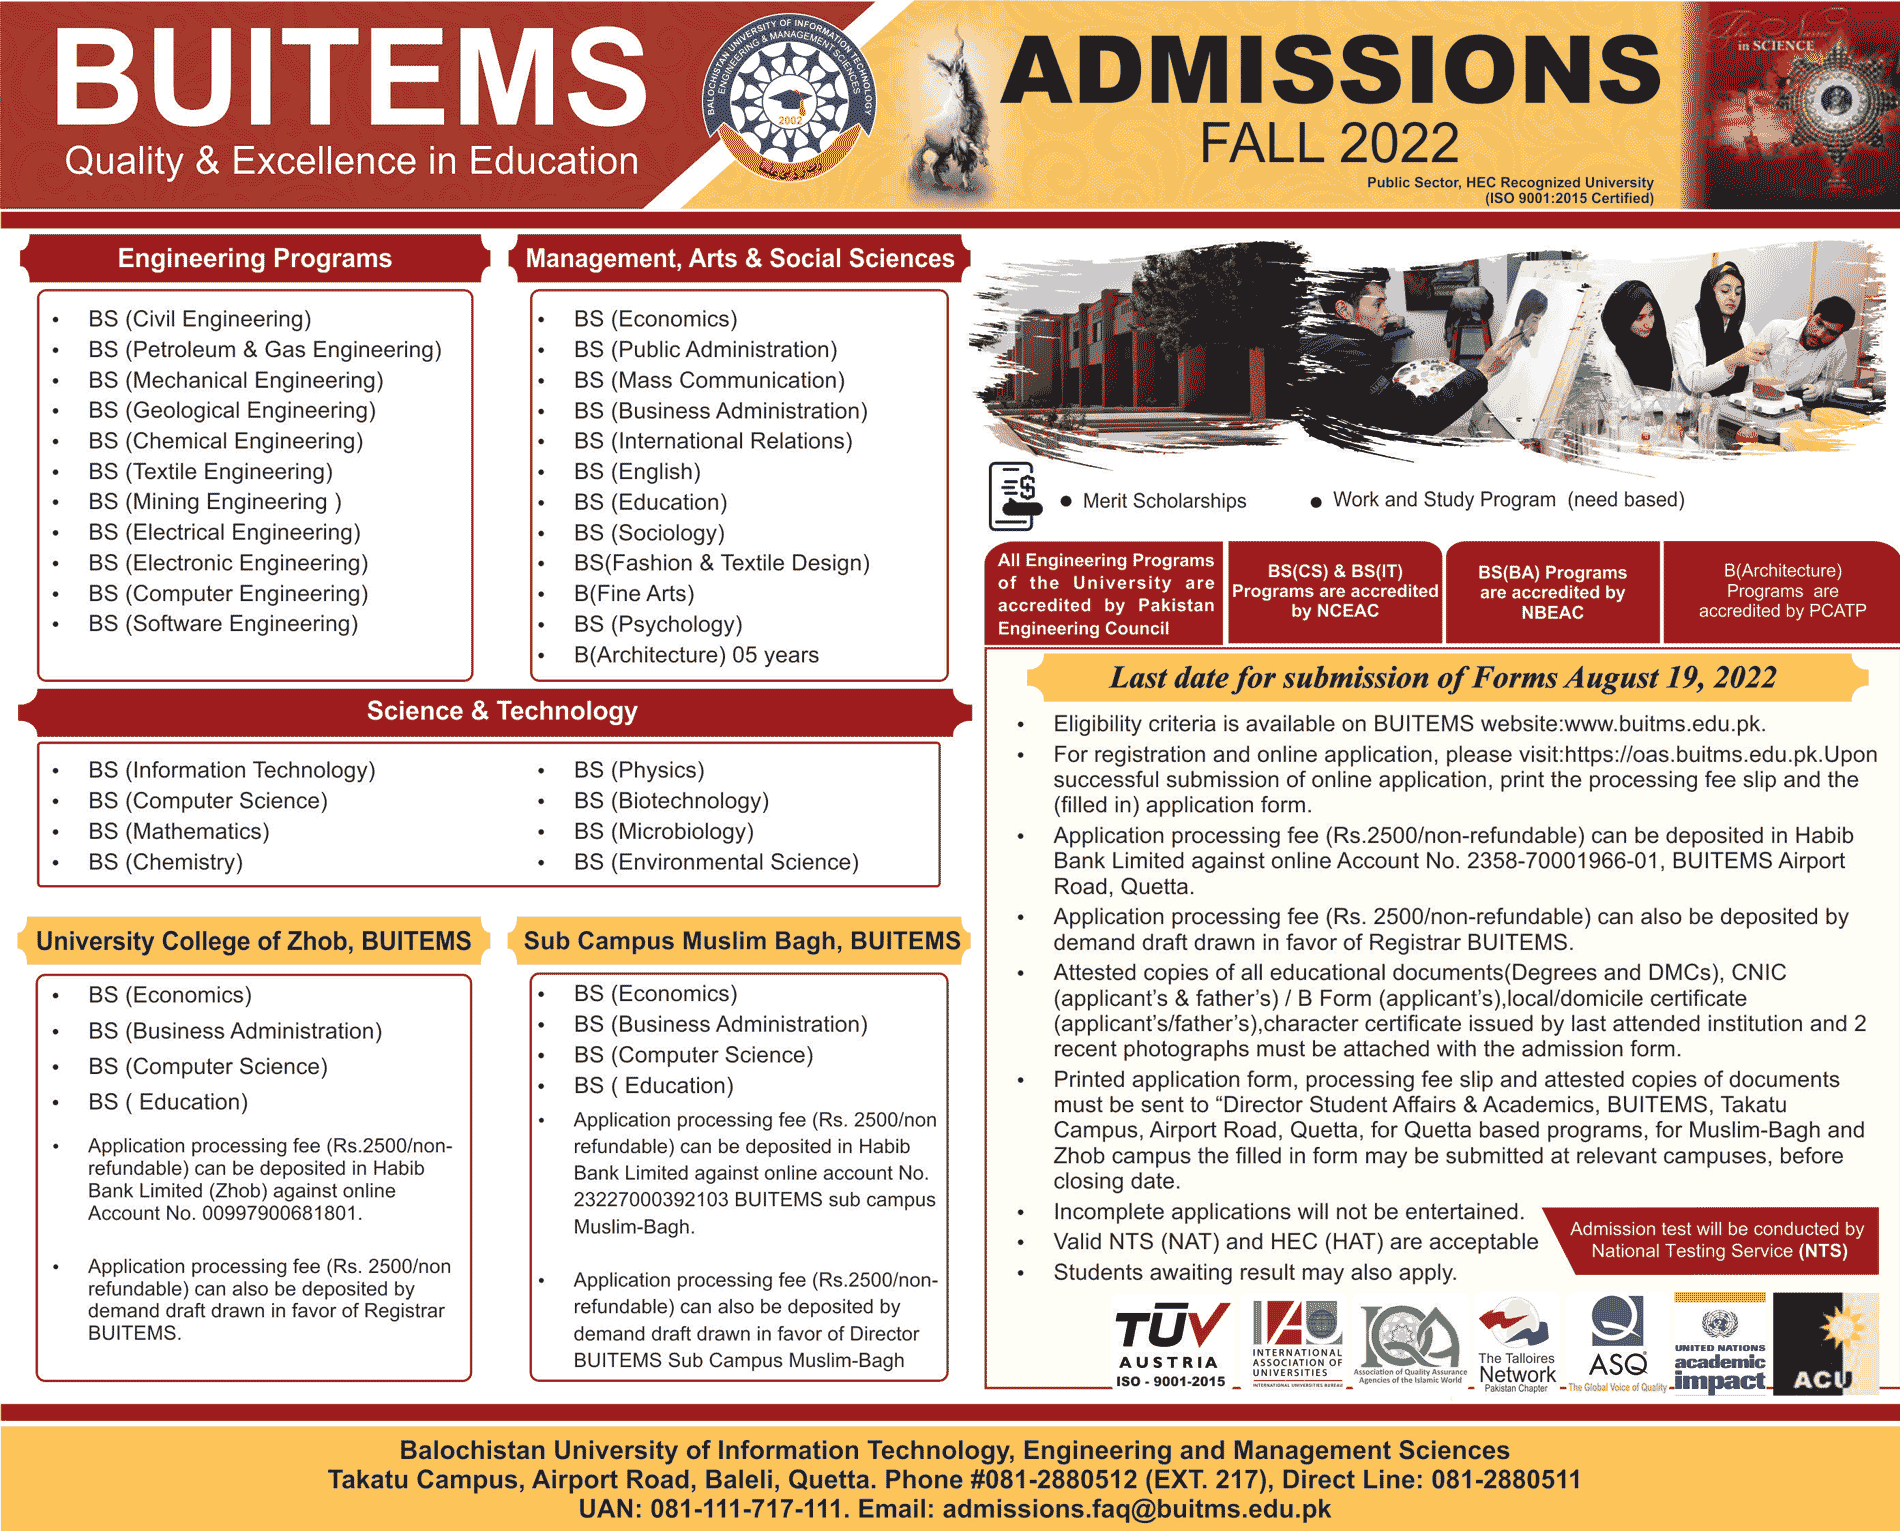 BUITEMS Fall Admission 2022